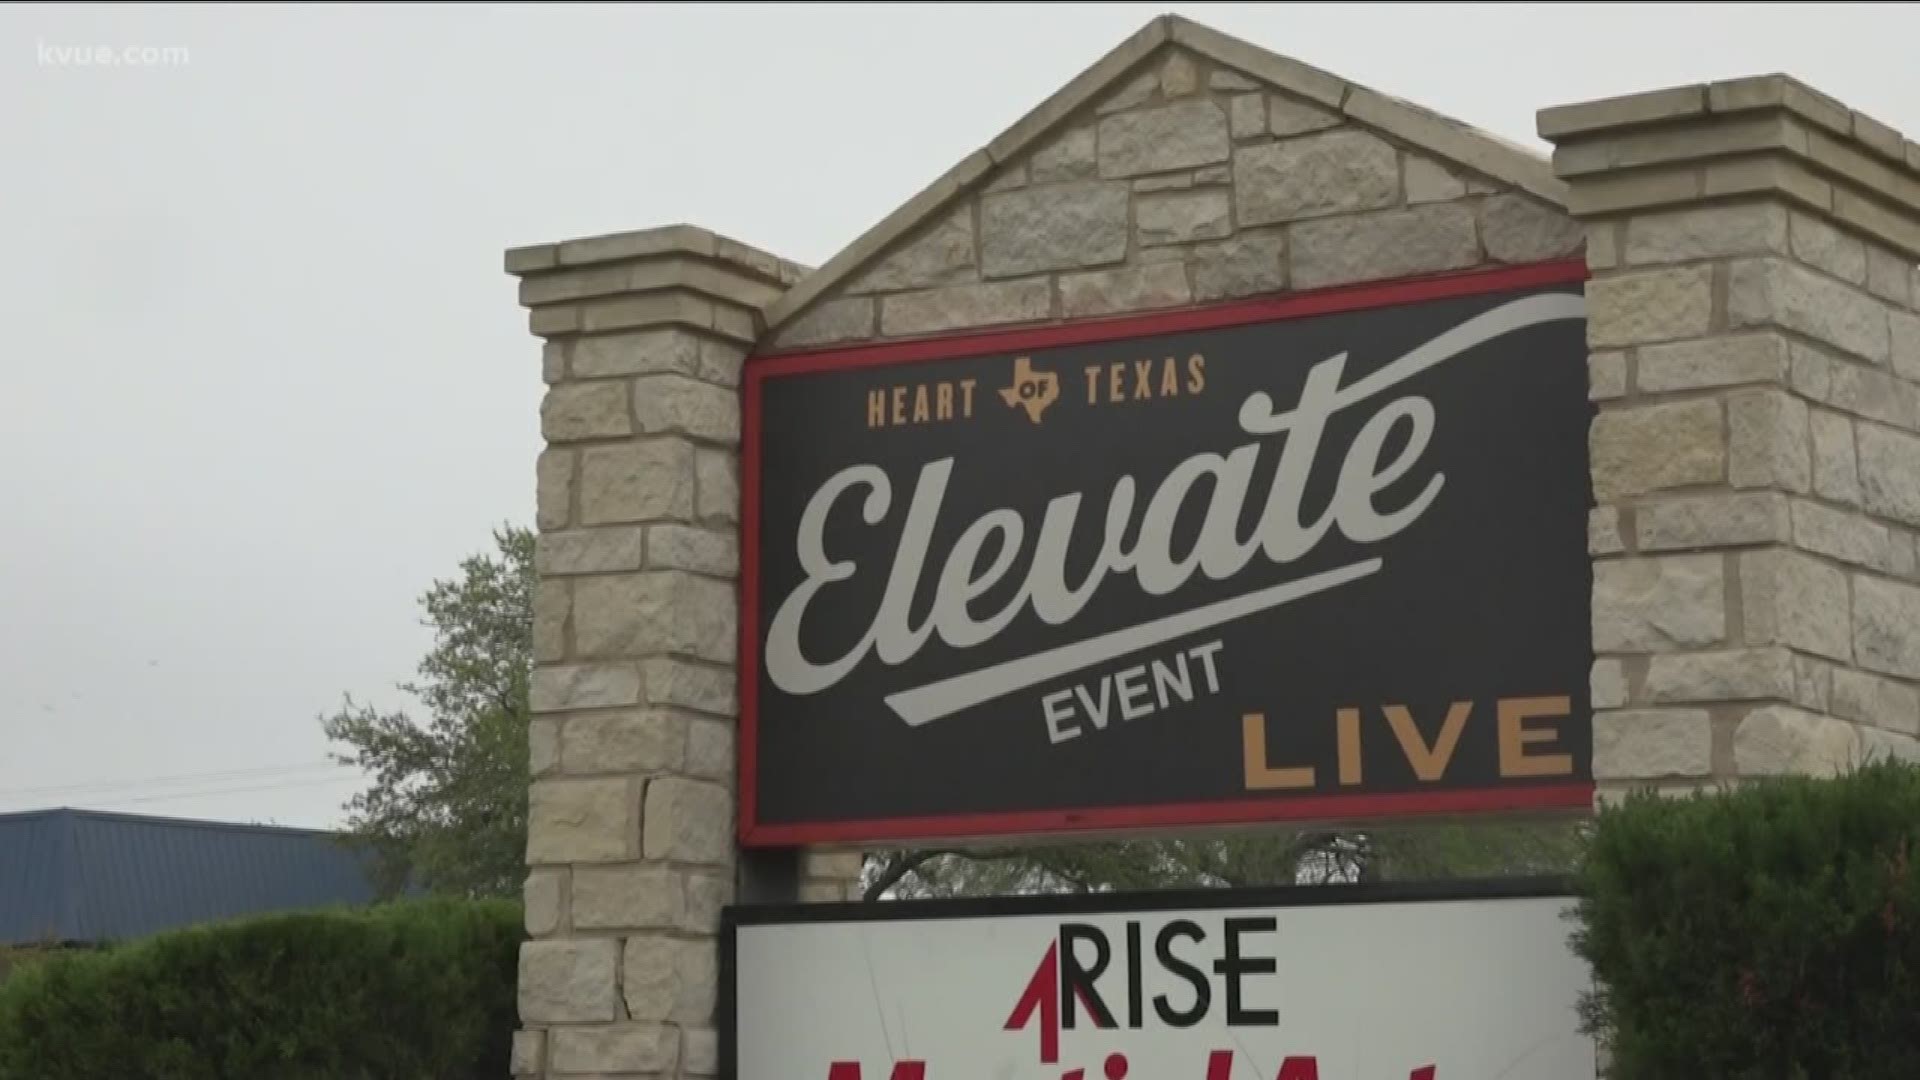 The coronavirus has resulted in big sales for some businesses, but an Austin event planner told KVUE she doesn't know the fate of her business.